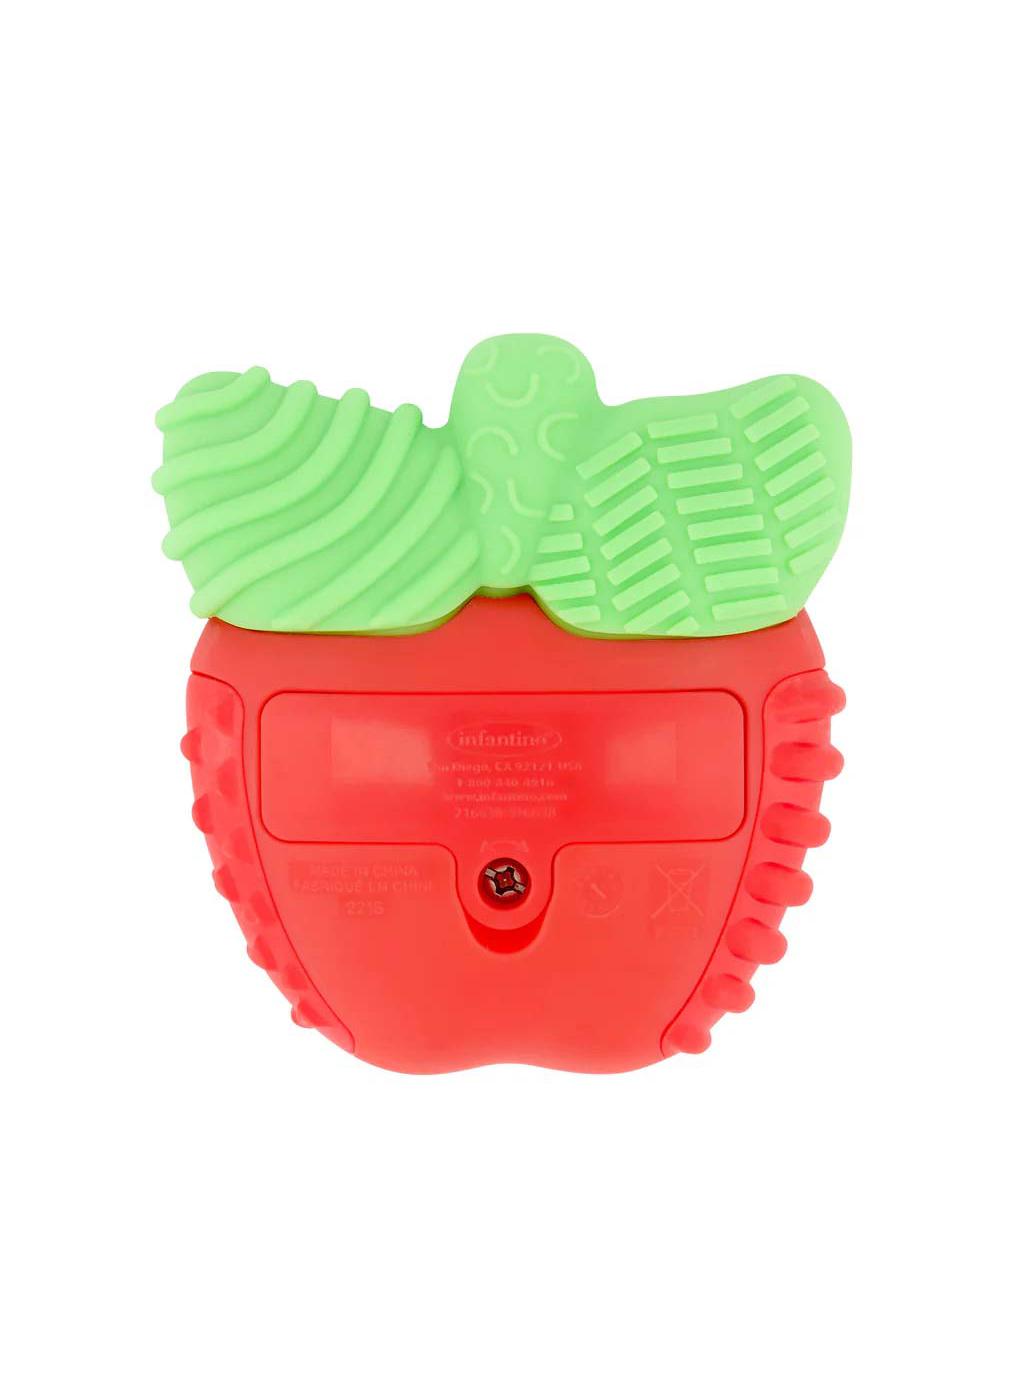 Infantino Lil' Nibblers Vibrating Apple Teether; image 2 of 2